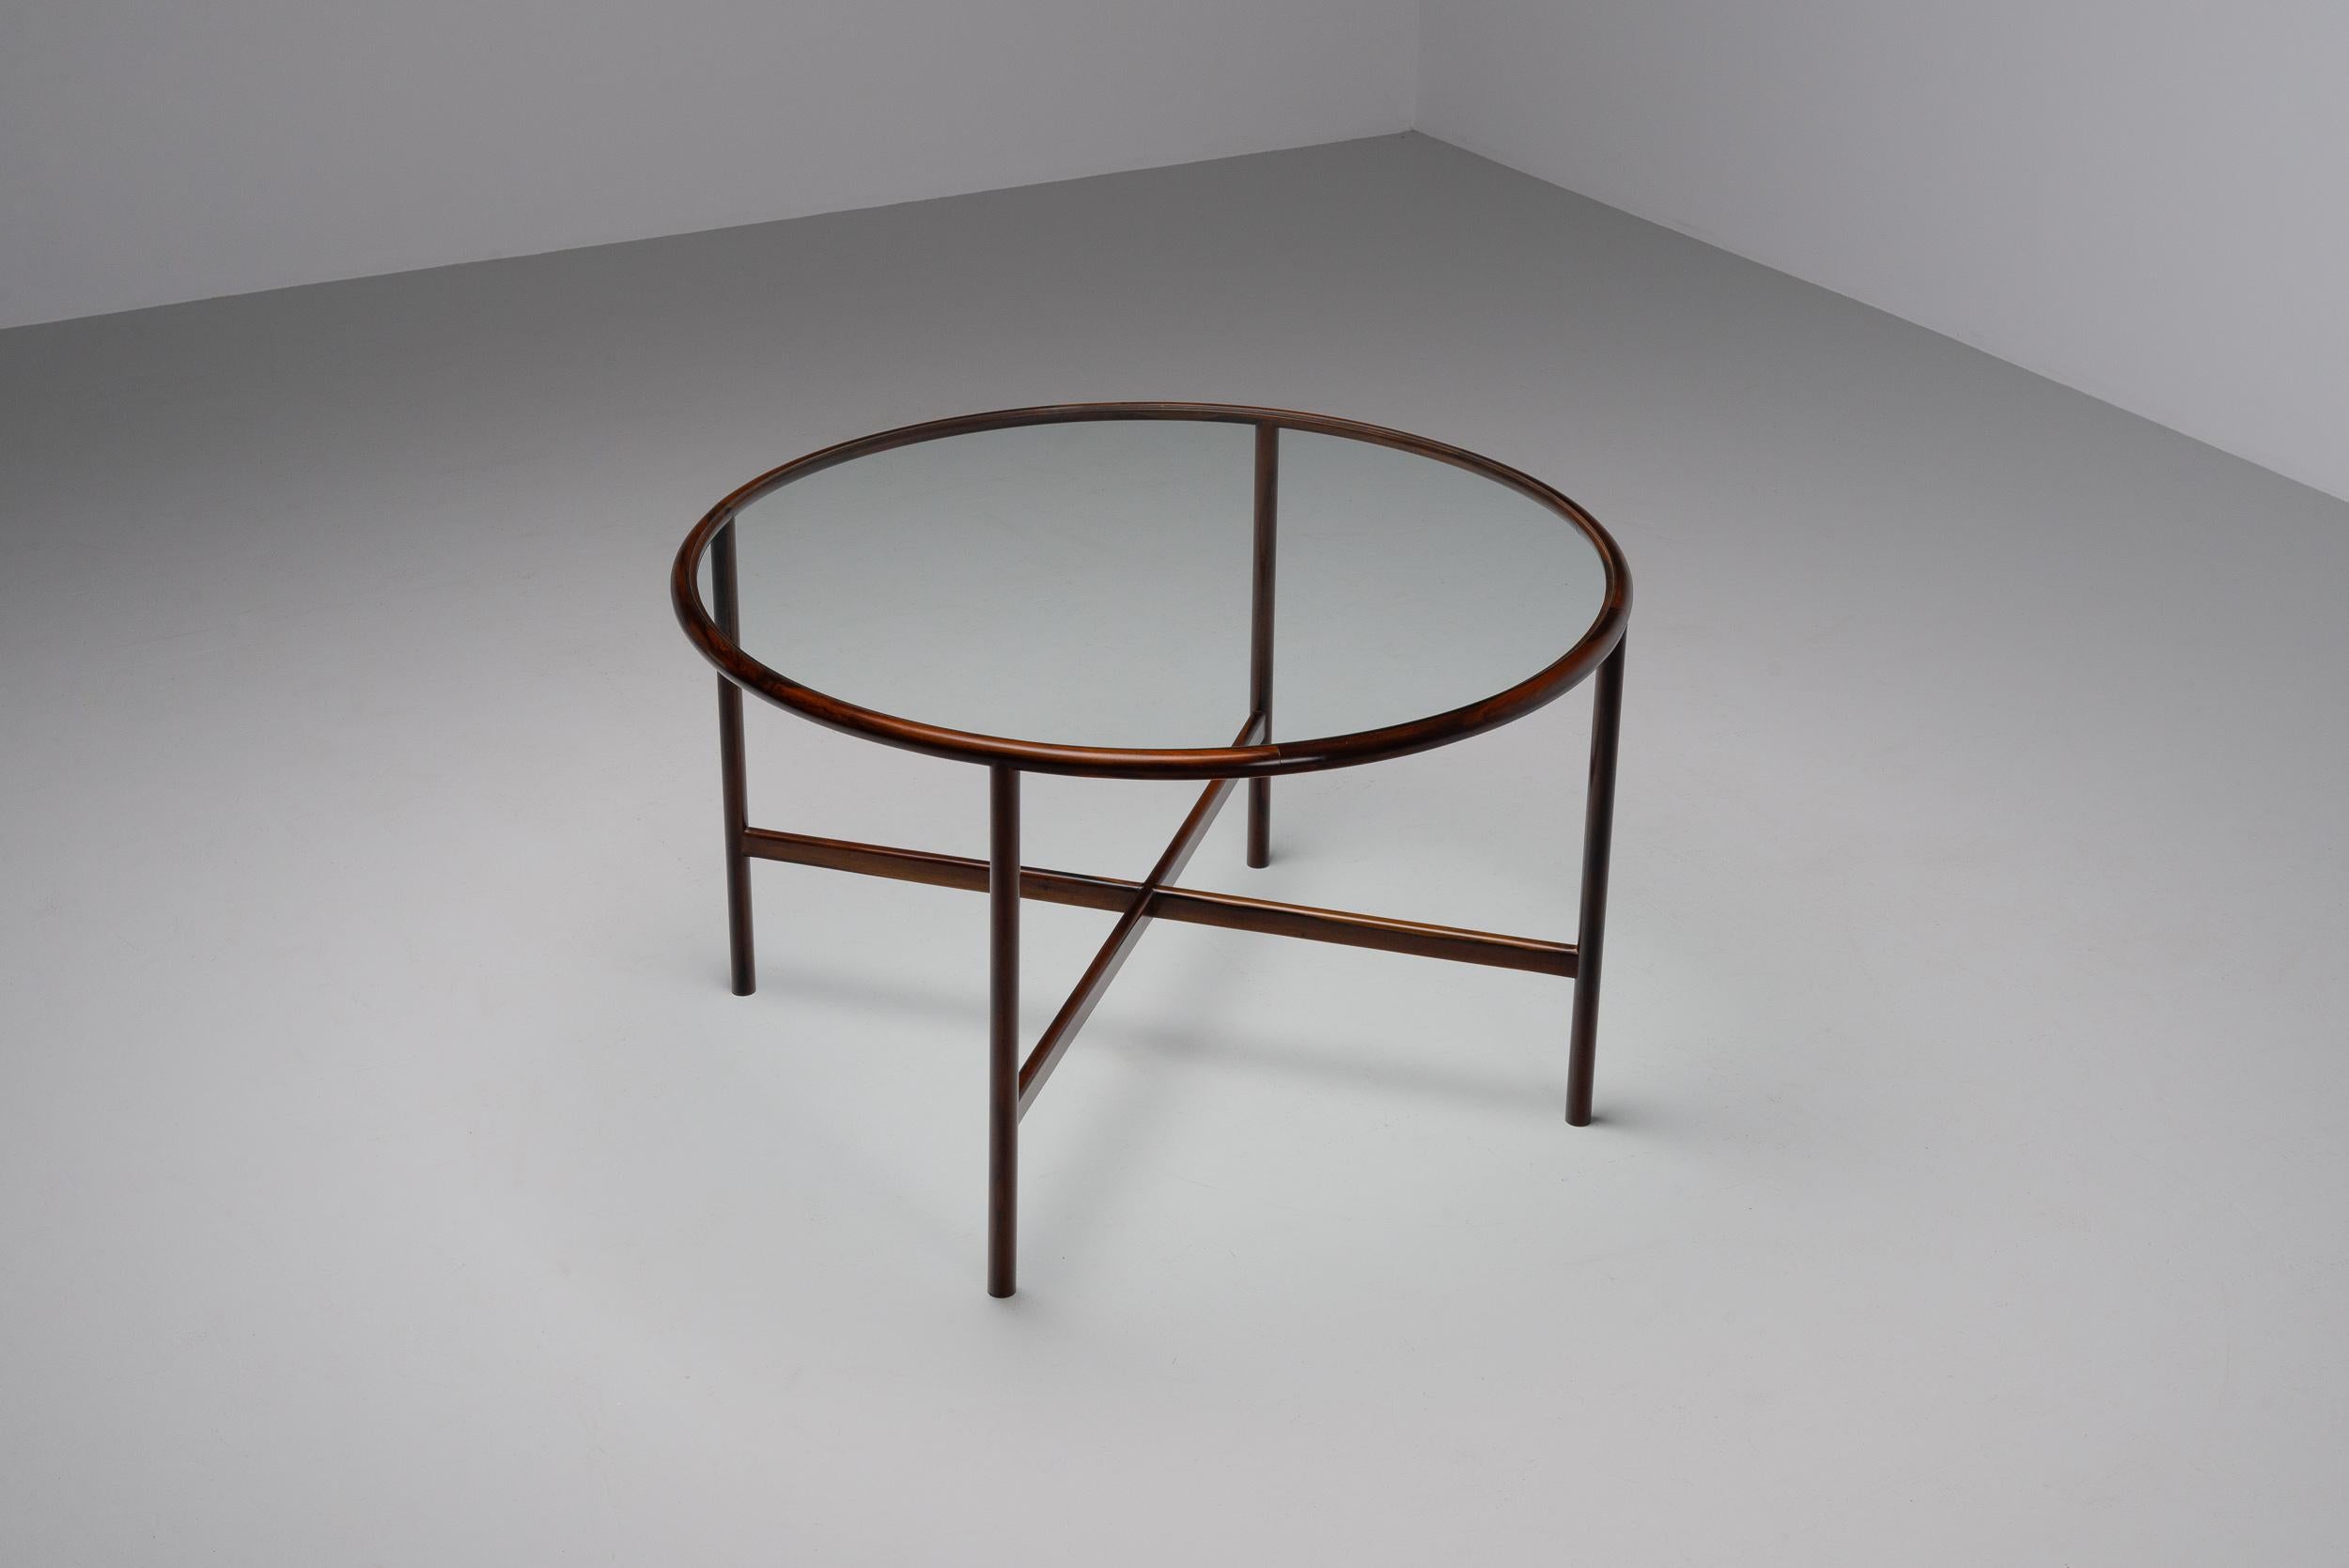 Beautiful and super rare round dining table by Joaquim Tenreiro, Brazil 1960. The precision and attention to detail by Tenreiro are visible in every inch of this creation. Each curve and joint speak of his masterful understanding of the medium,